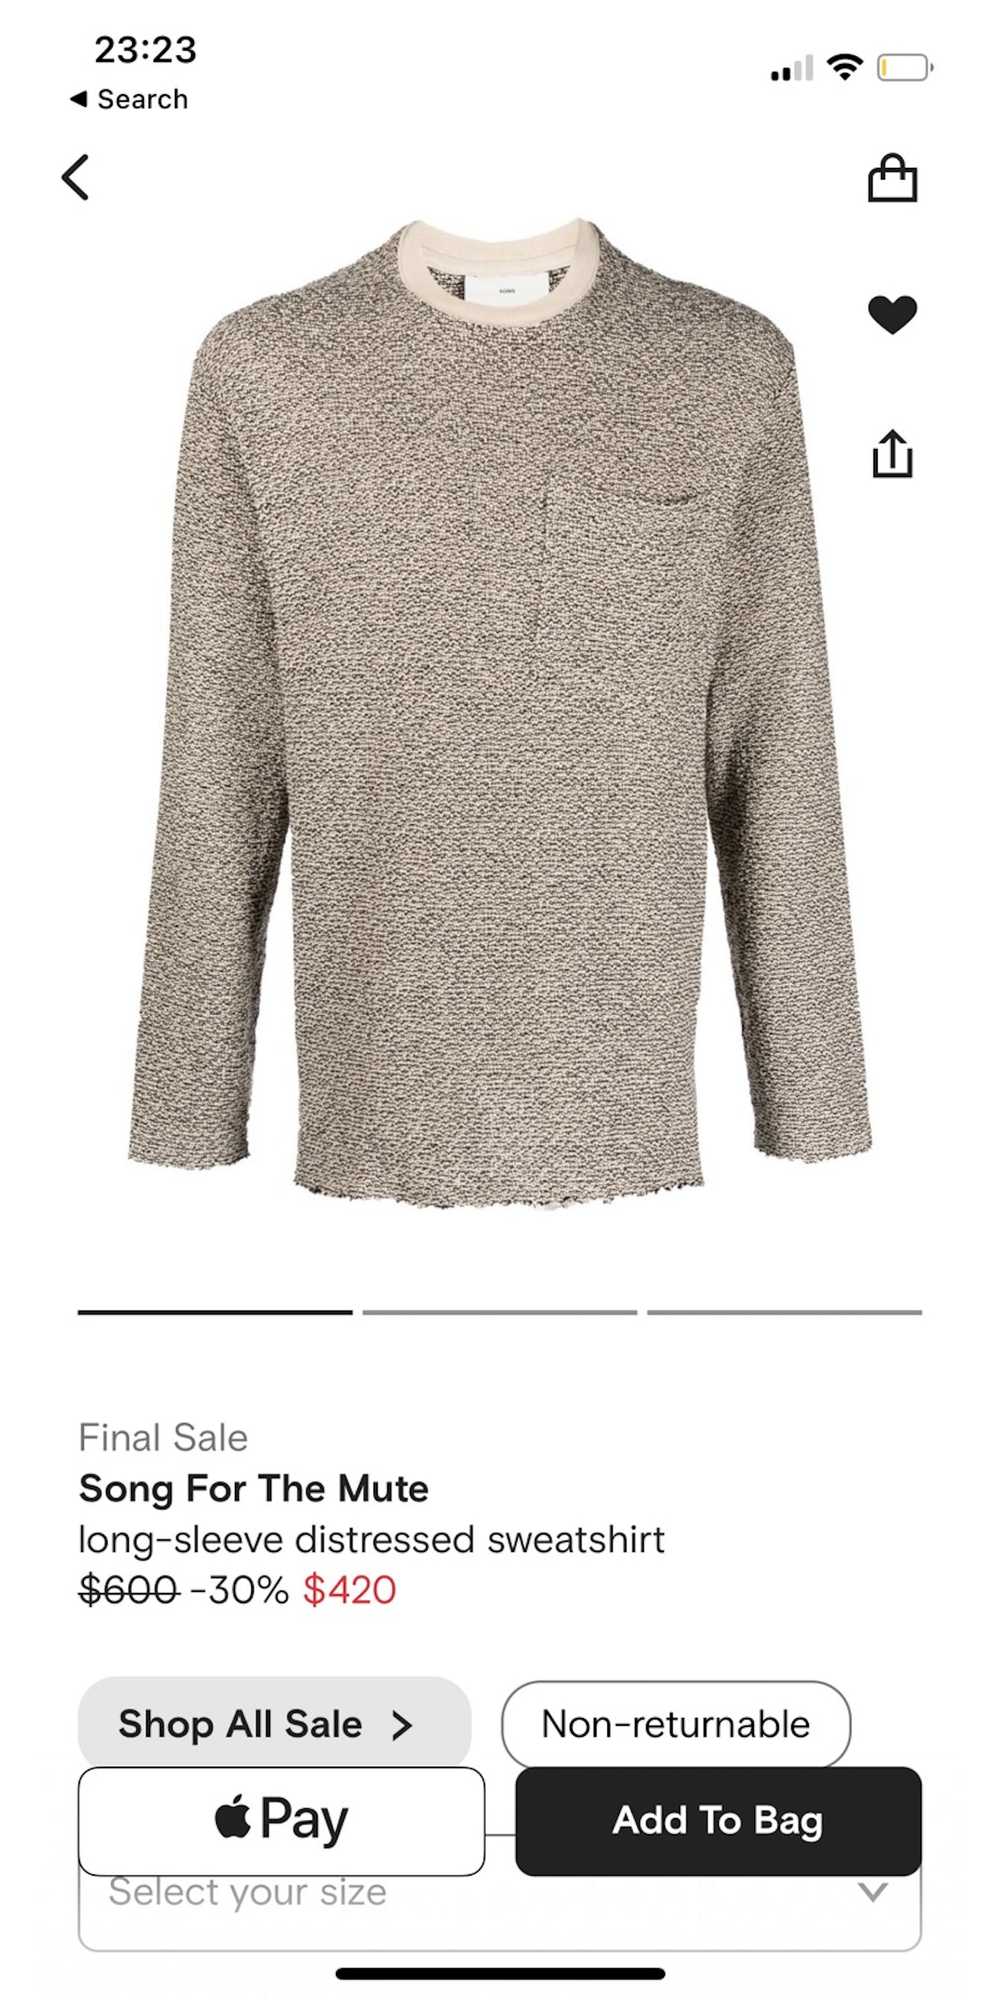 Song For The Mute Crew Neck Sweater - image 2